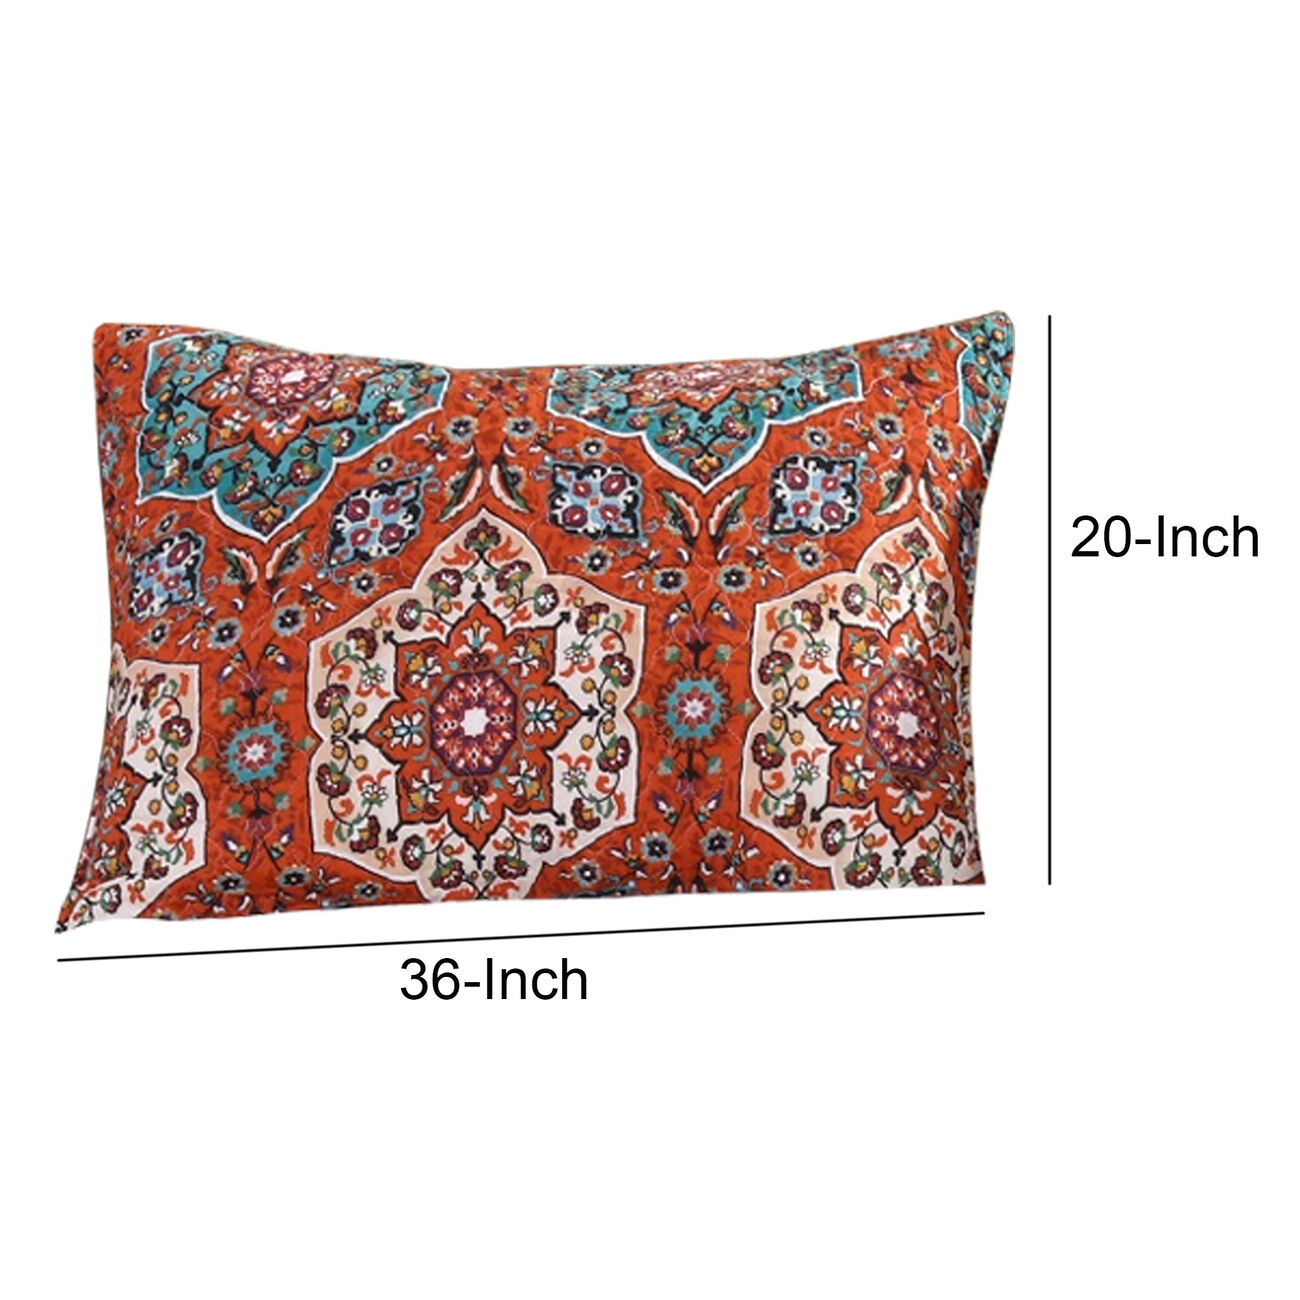 36 x 20 Polyester King Size Sham with Medallion and Floral Motif, Red